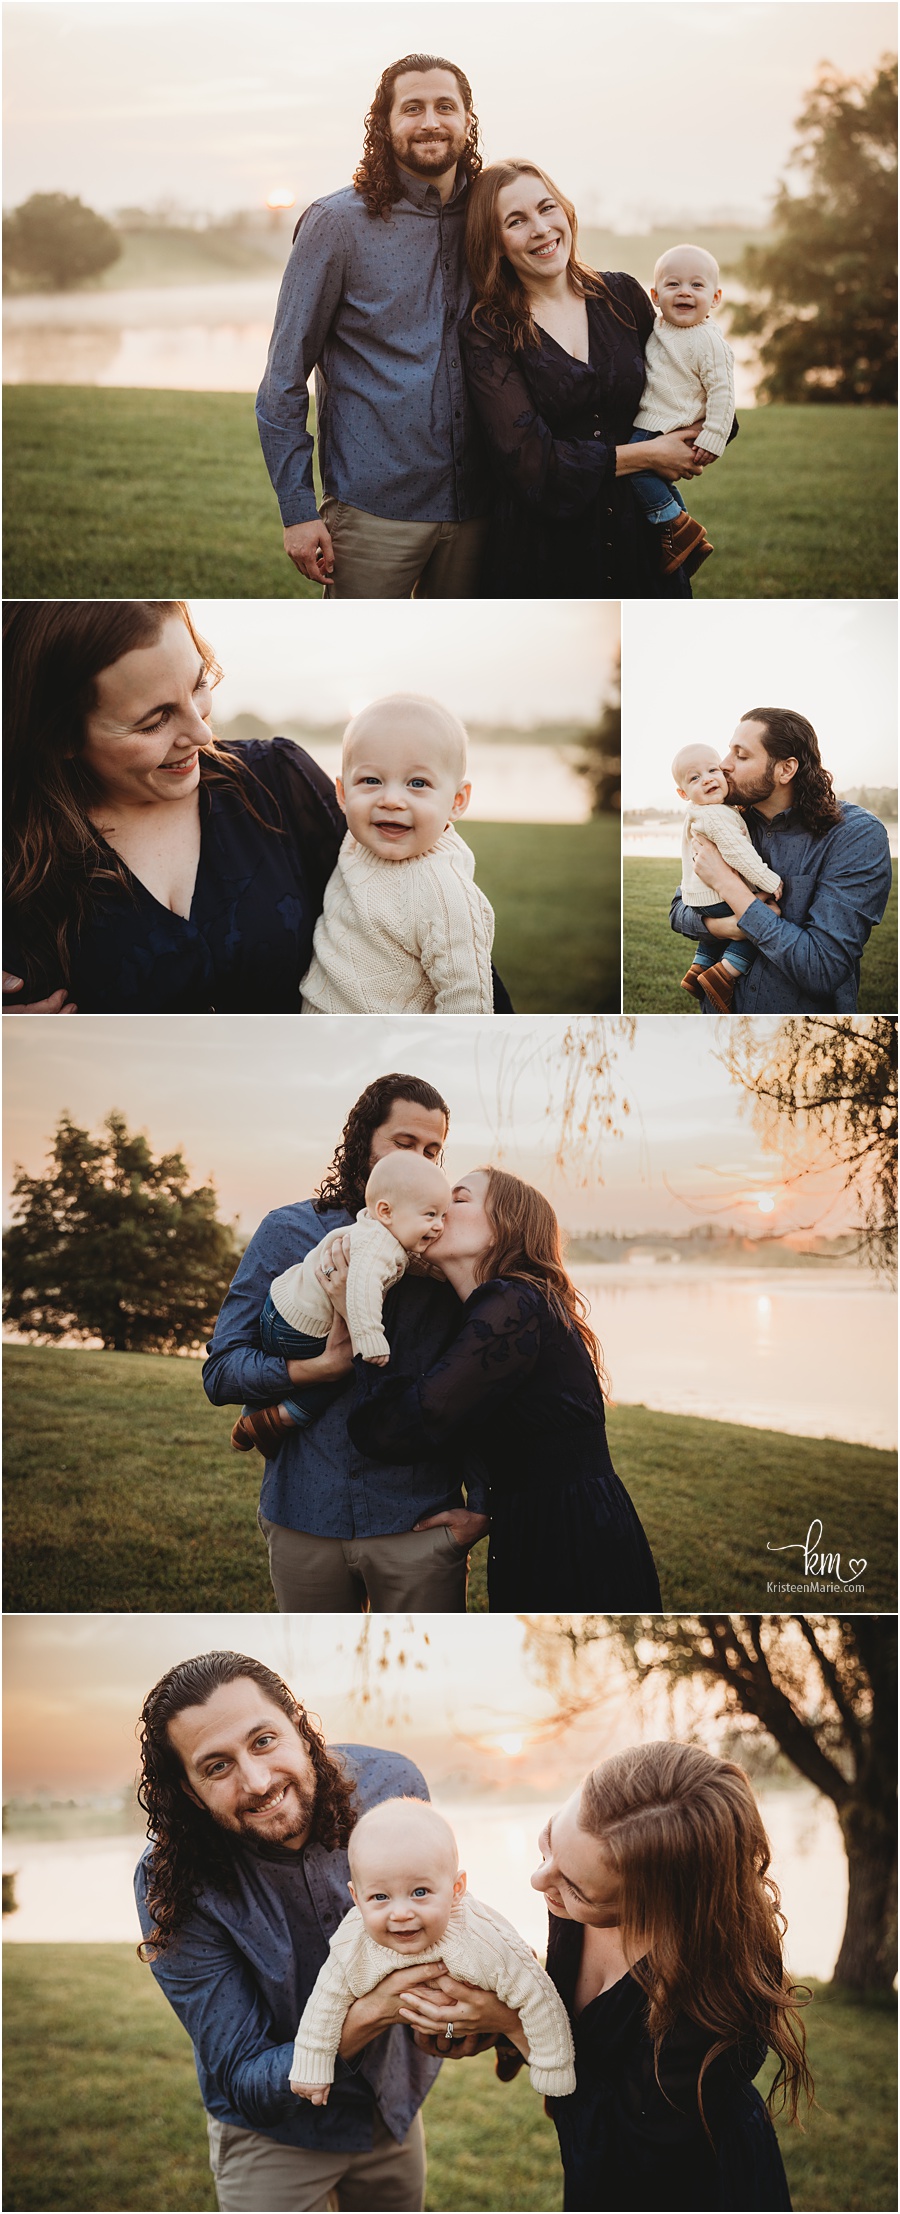 outdoor family session at sunrise by water - Carmel, Indiana